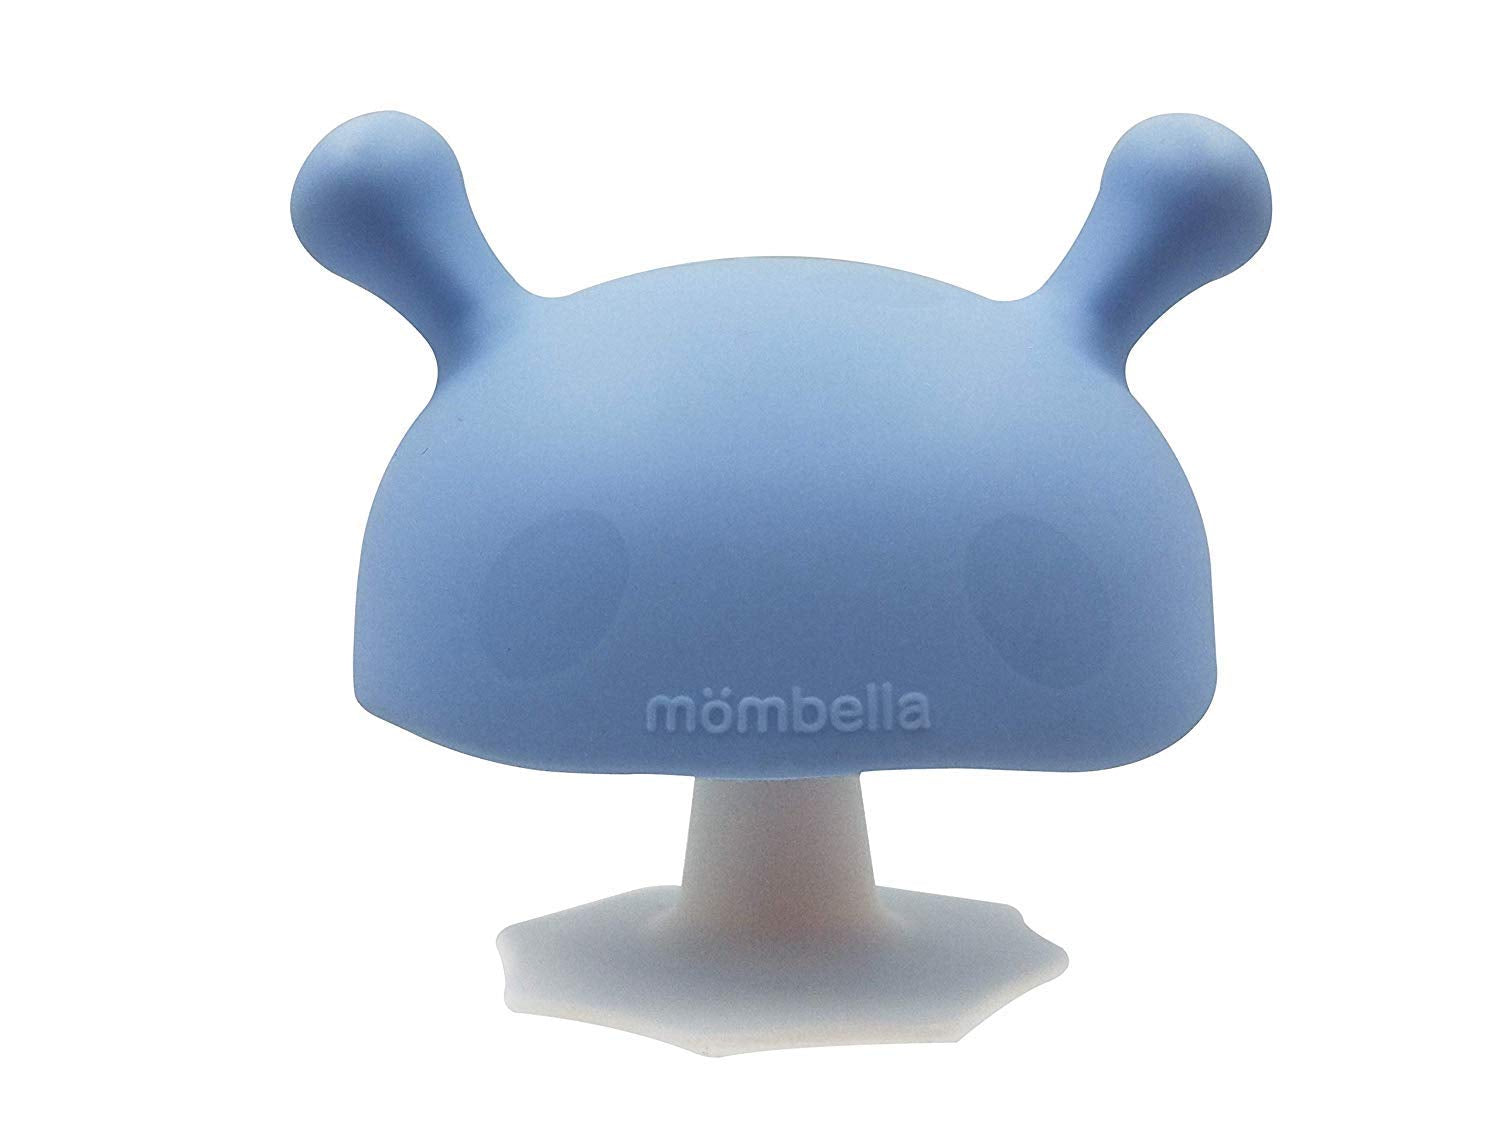 Mombella Mimi Mushroom Pacifier Shape Skin-Like Infant Soothing Teether Toy for 0-6 Months Sucking Needs Babies, Help with Breast Feeding weaning and Prevent Digit Sucking.Light Blue